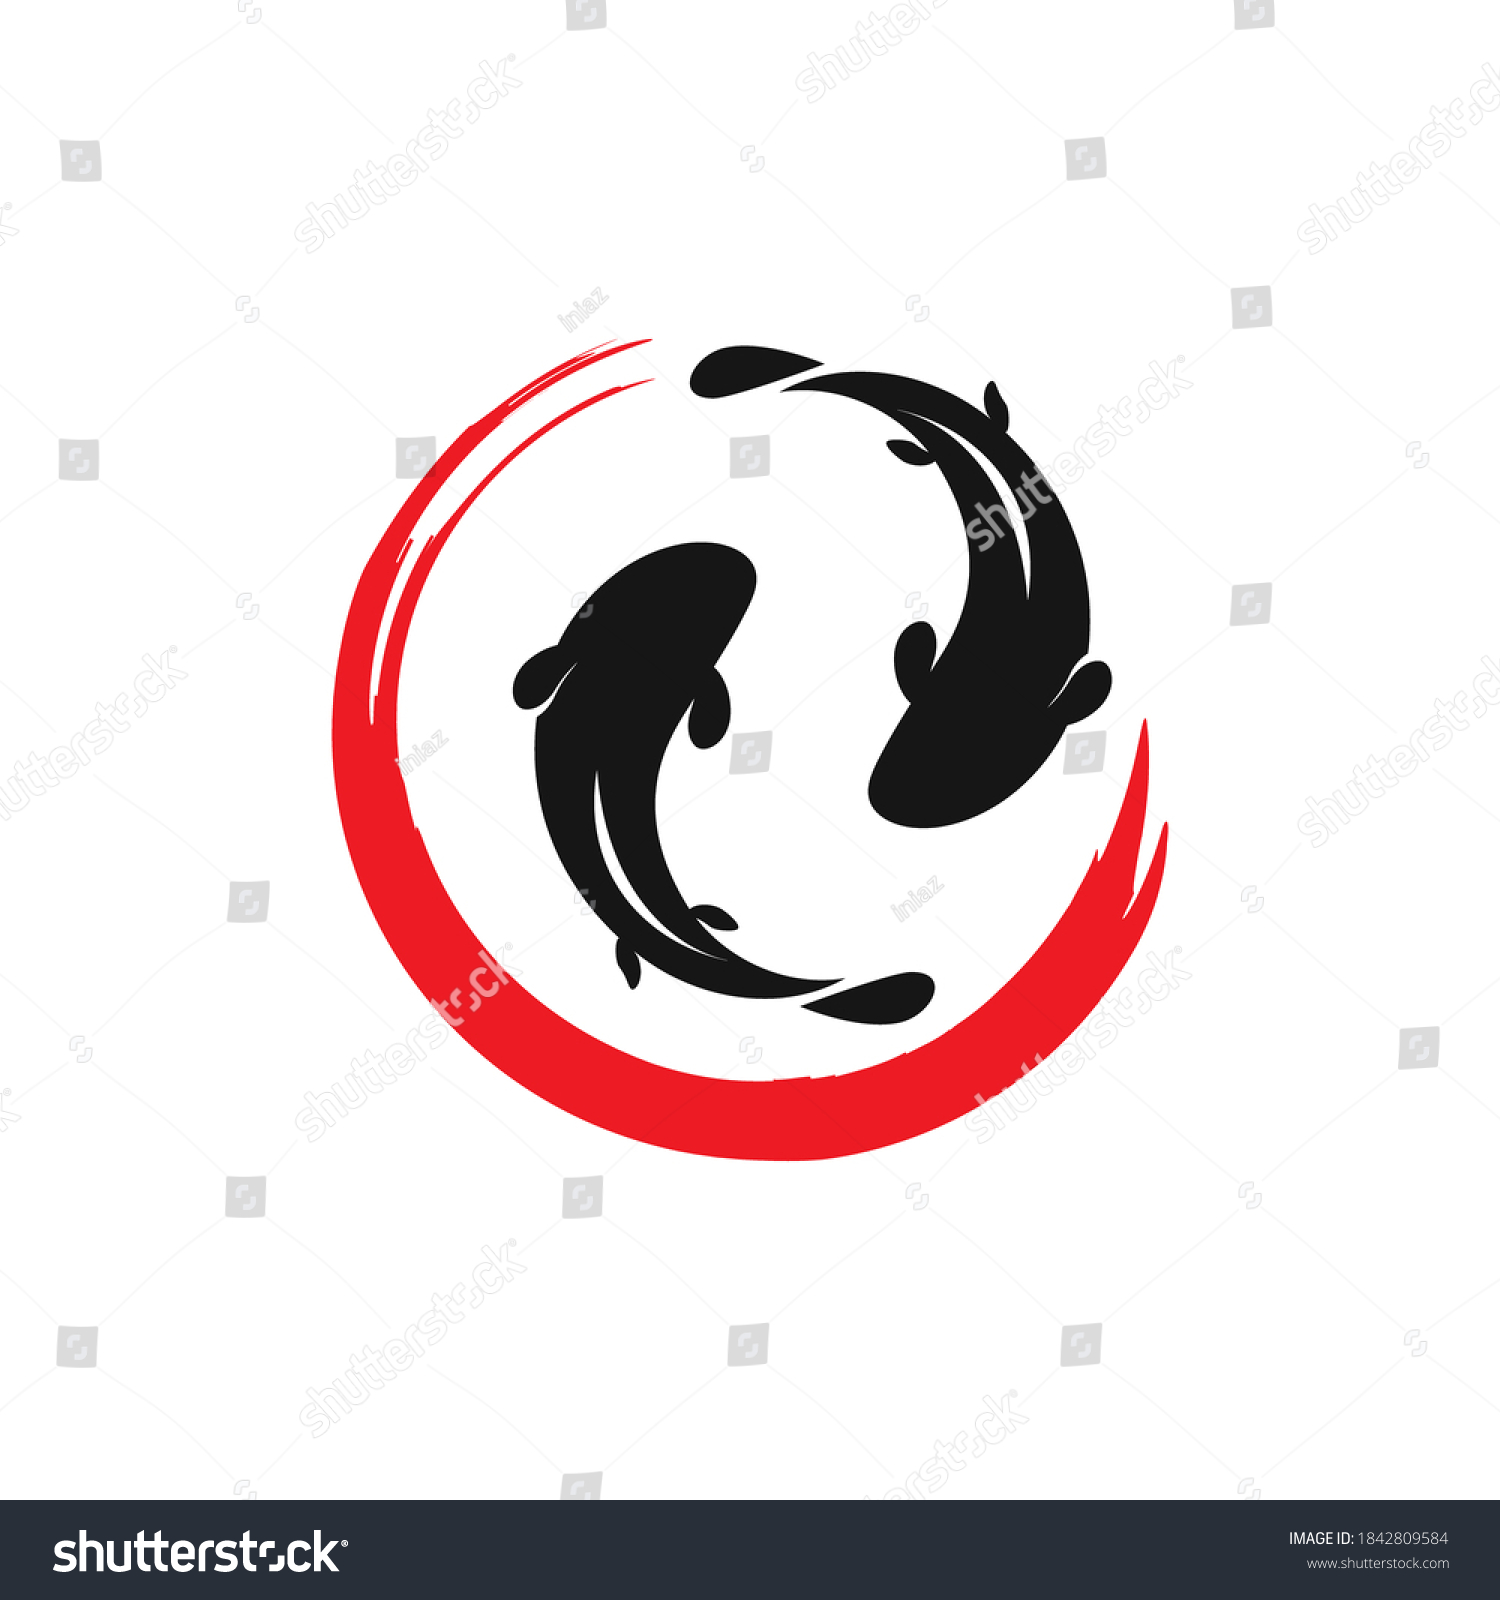 Japanese Koi Logo Template. Koi Fishes Logo. Luck, prosperity and good fortune. Animal, asian. This logo perfectly used for any fishing or aquarium related businesses. #1842809584